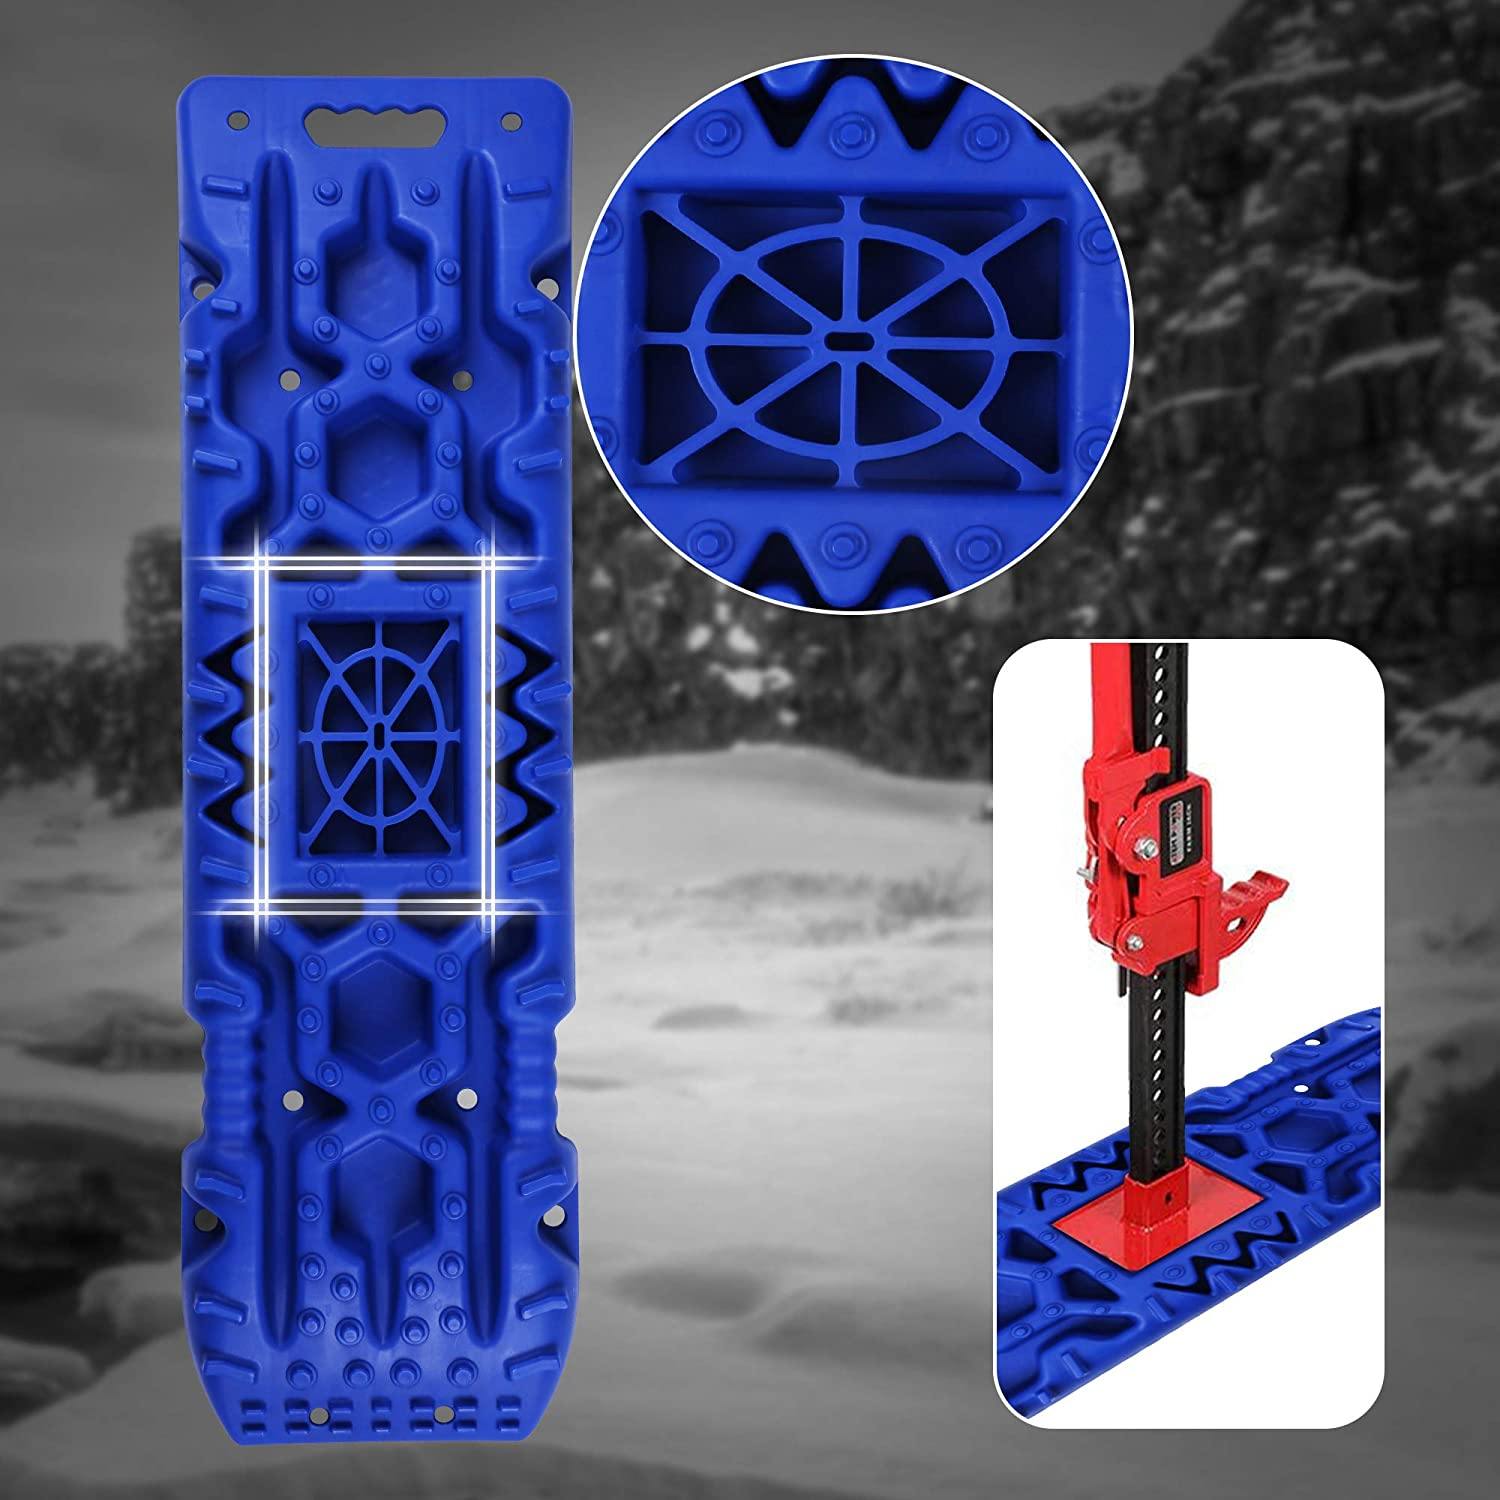 2 Pack Traction Boards with Jack Lift Base,Recovery Track Traction Mat for 4WD SUV, Jeep Tire Traction Tool Suitable for Mud, Sand, Snow, Ice Blue - Bosonshop